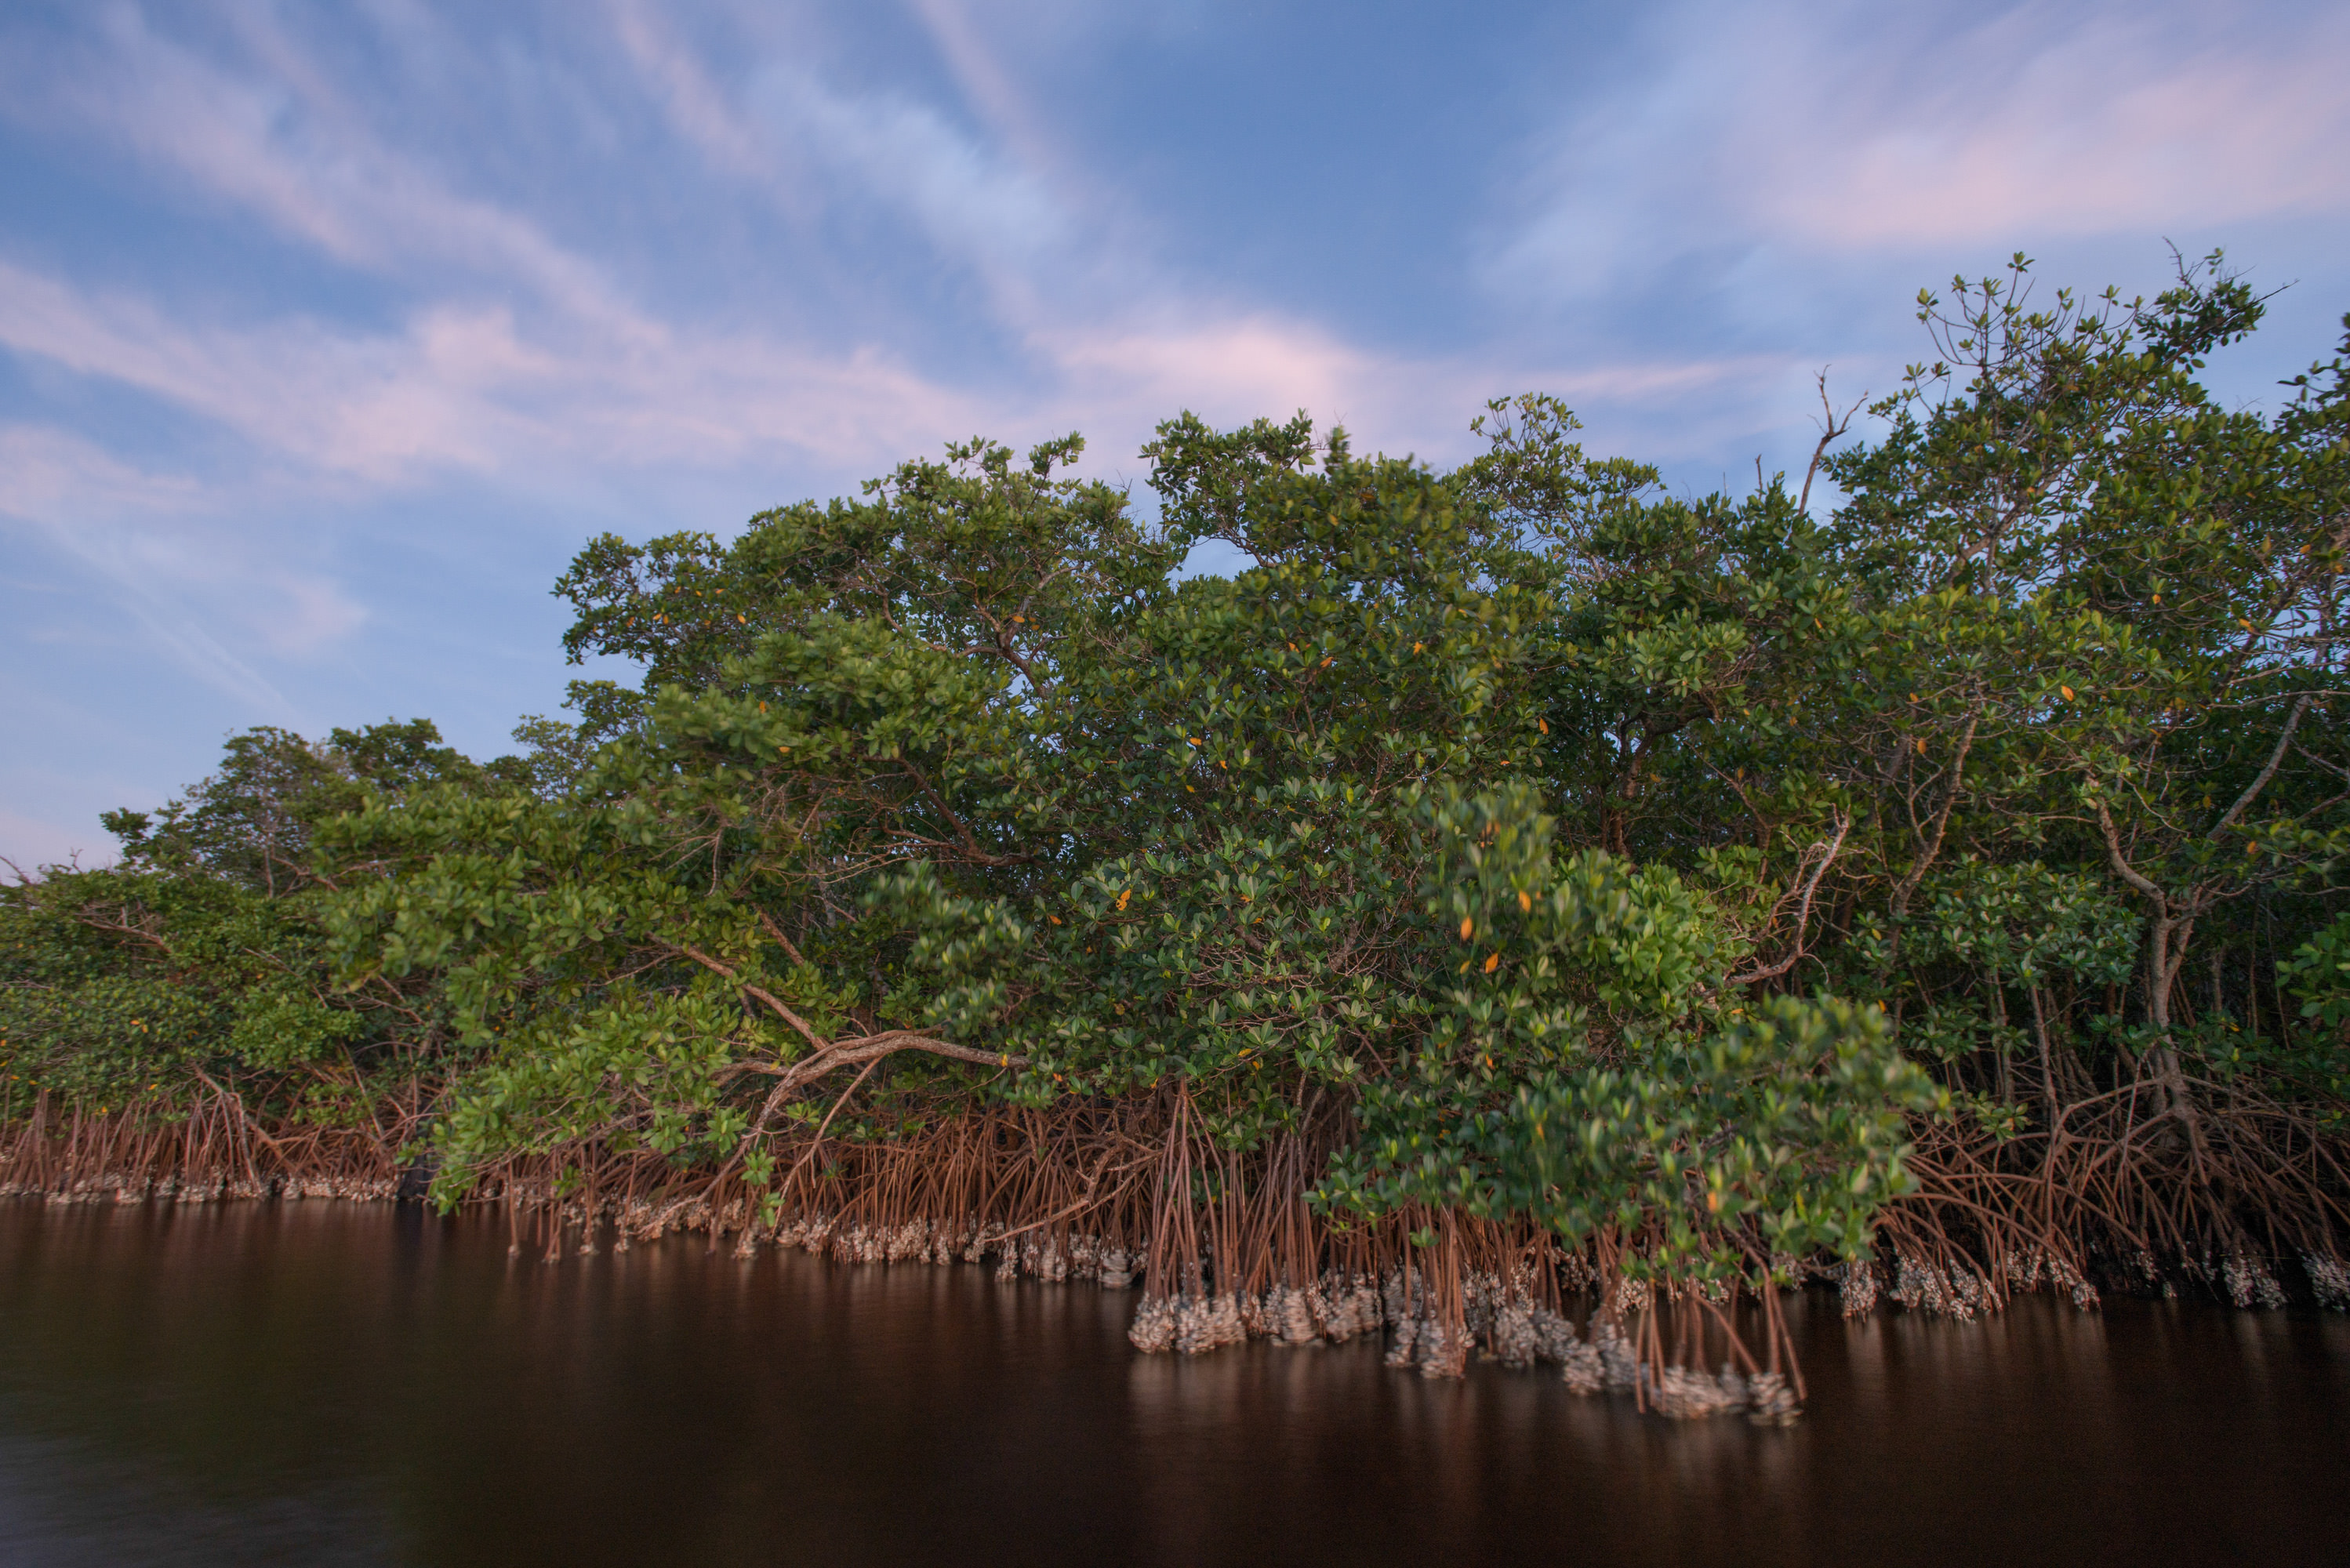 A forest of mangroves along a water body's edge.